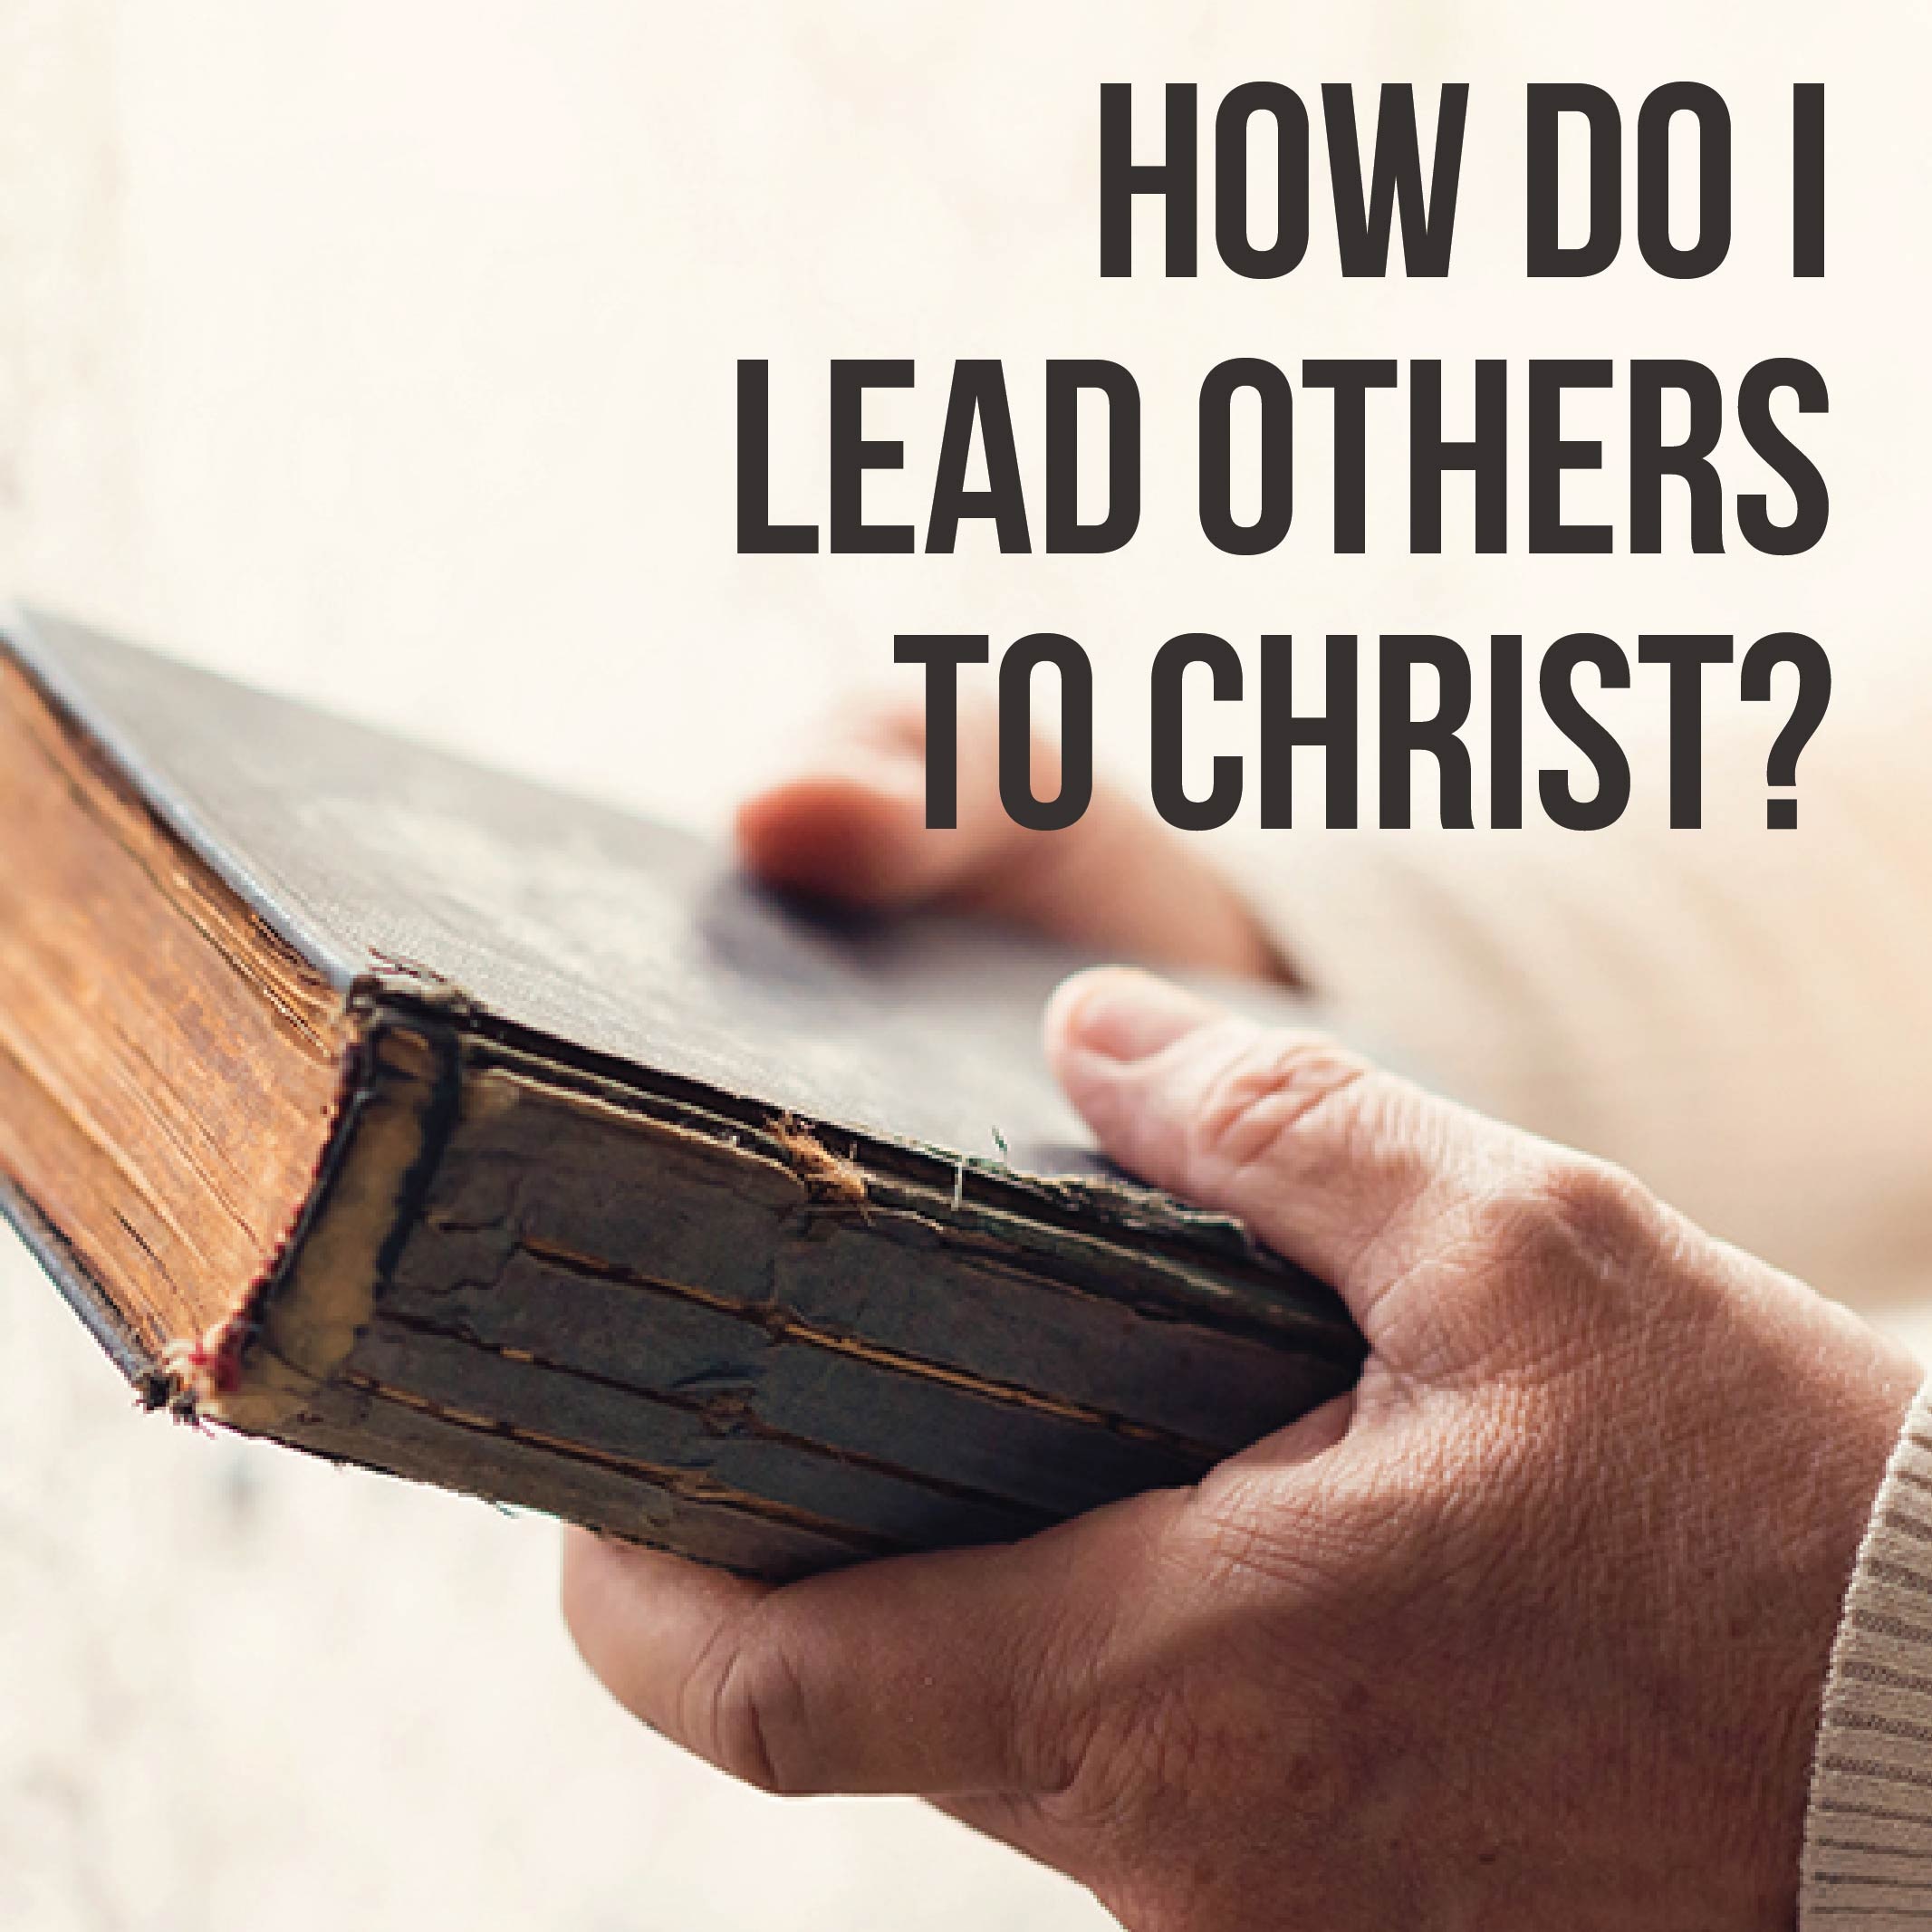 How Do I Lead Others To Christ?